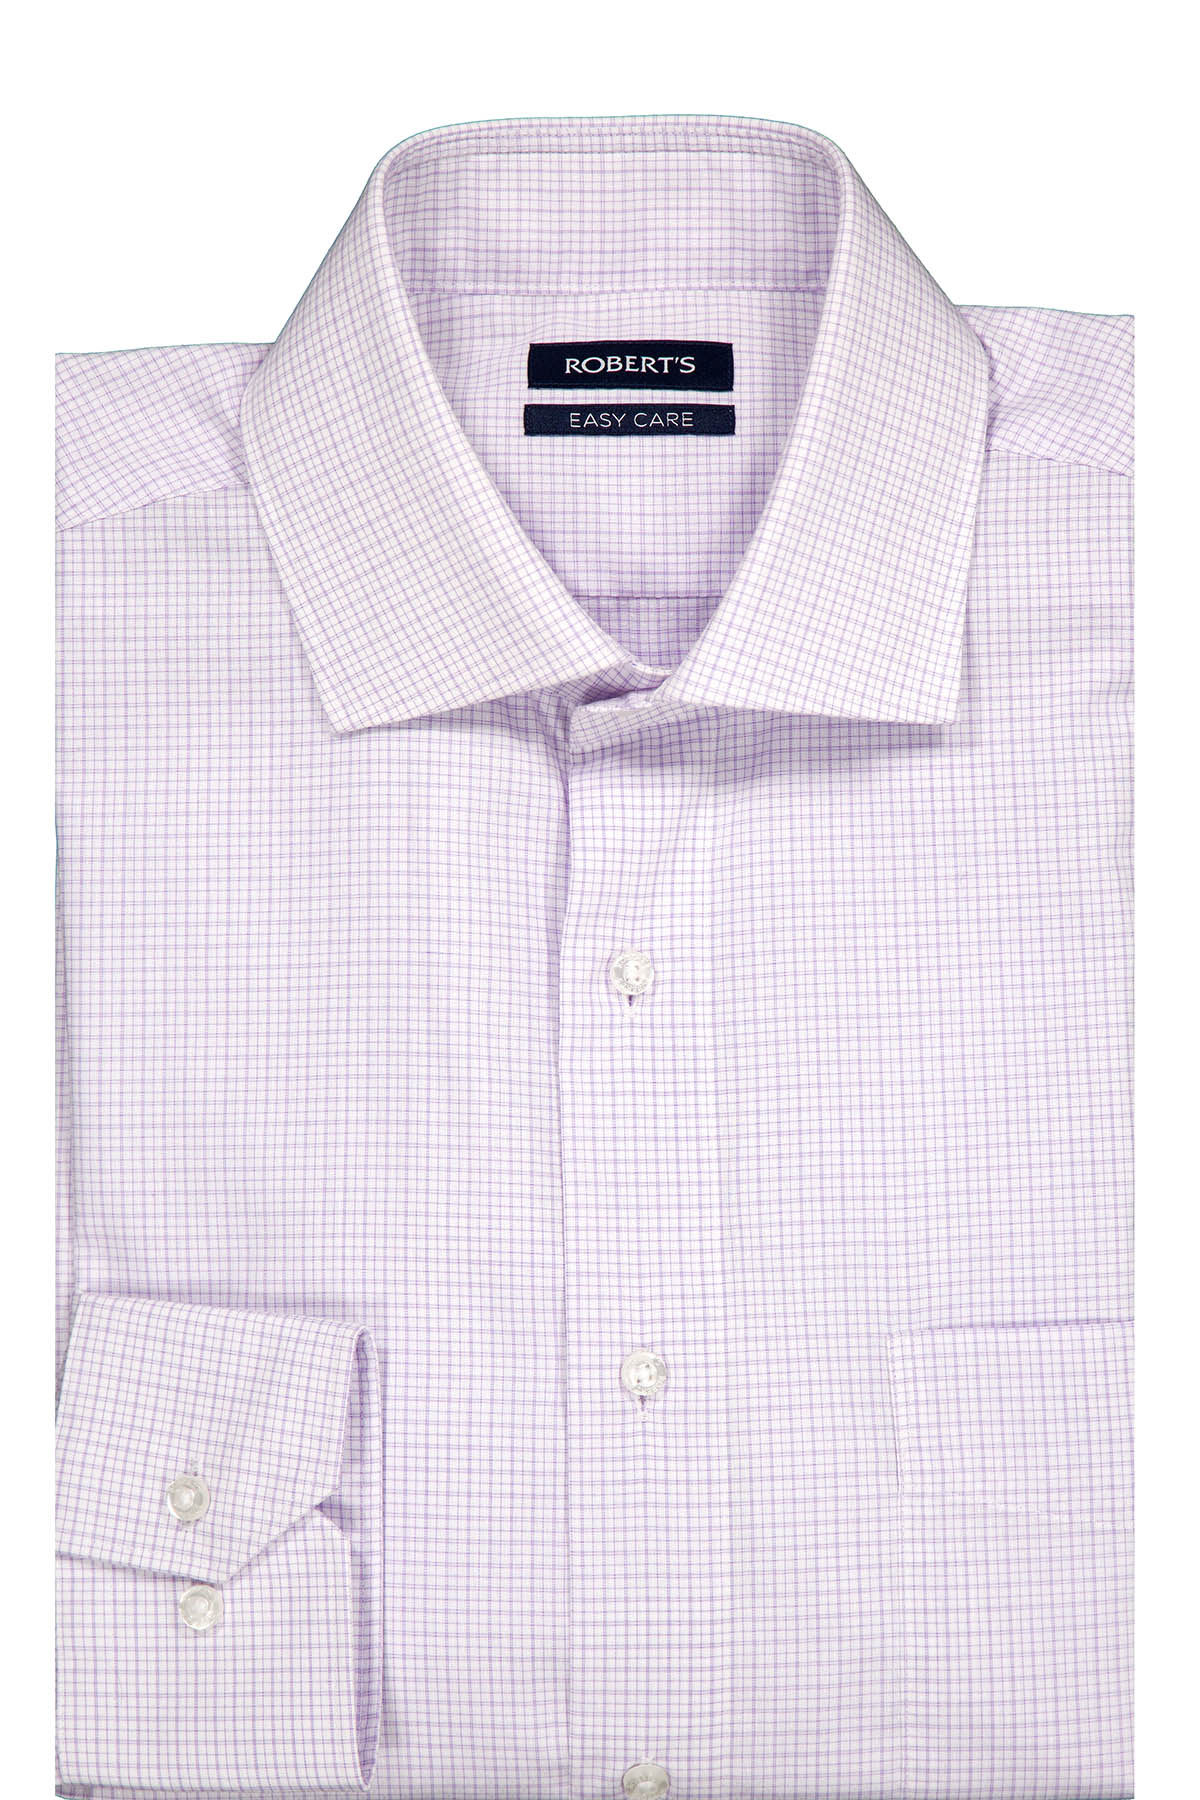 Camisa Formal Roberts Easy Care Contemporary Fit Color Blanco